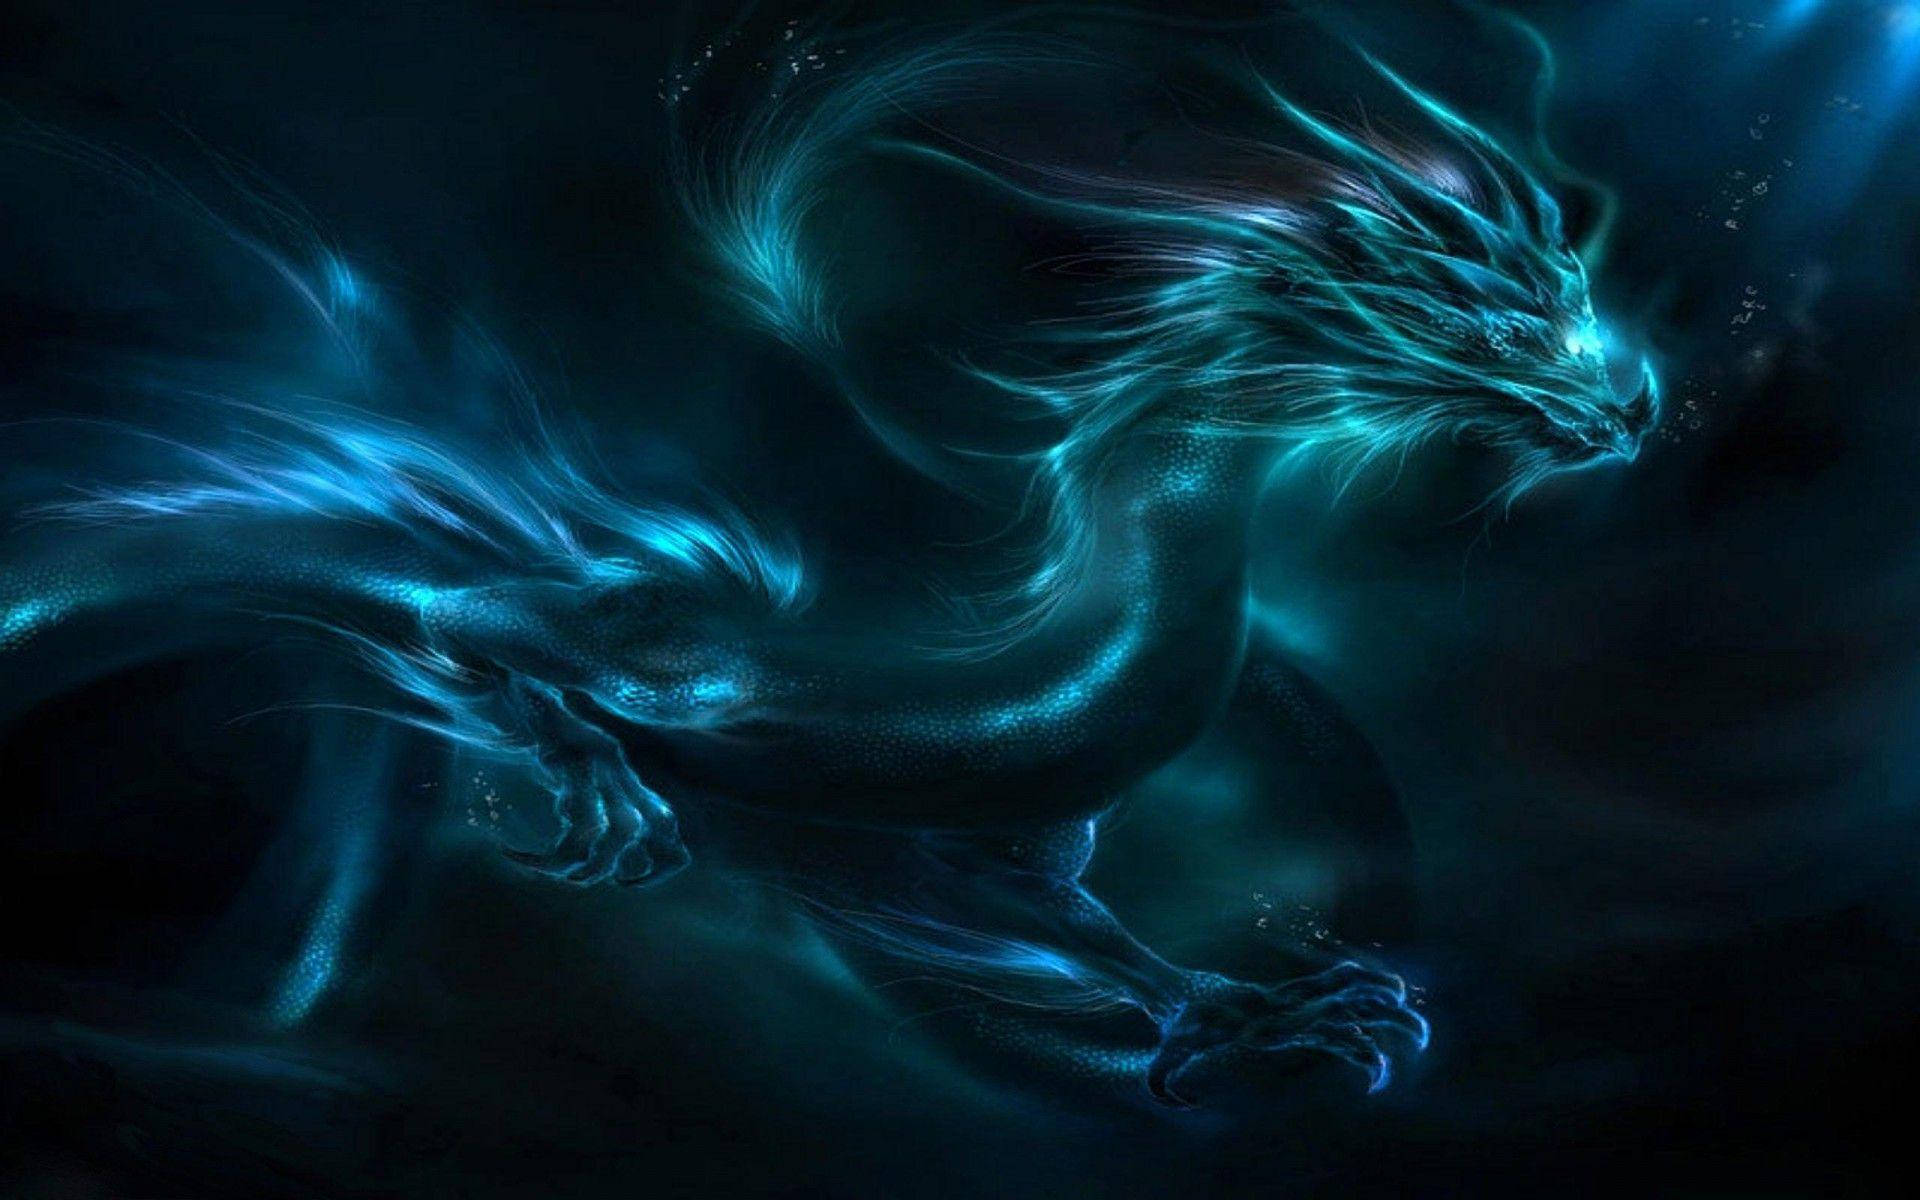 “Awesome Dragon with Blue and Orange Flames” Wallpaper